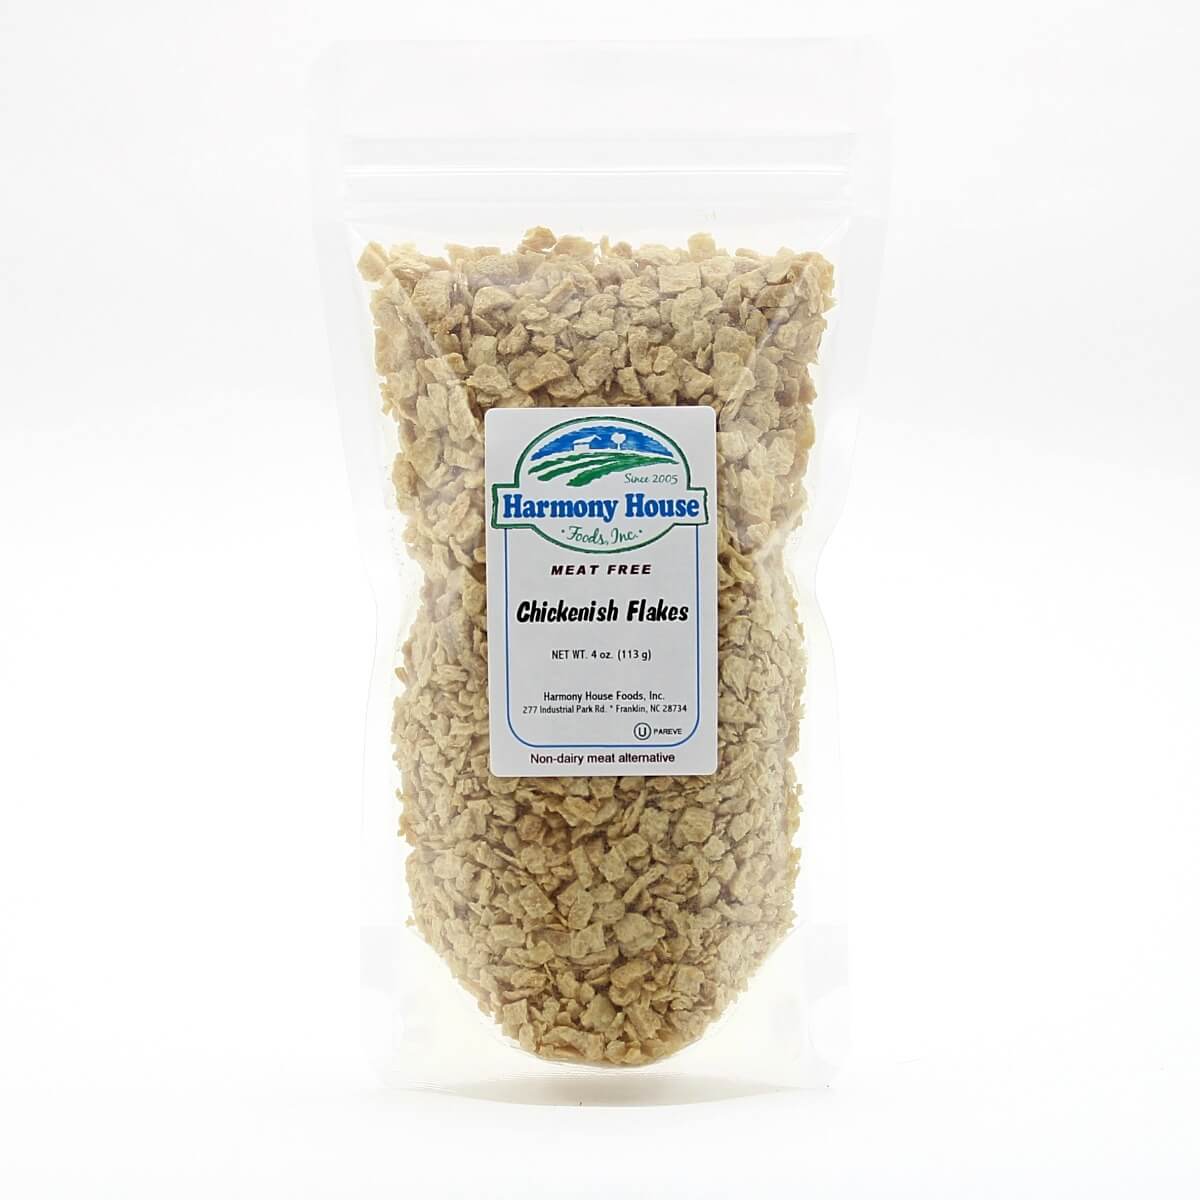 A bag of granola on a white background.